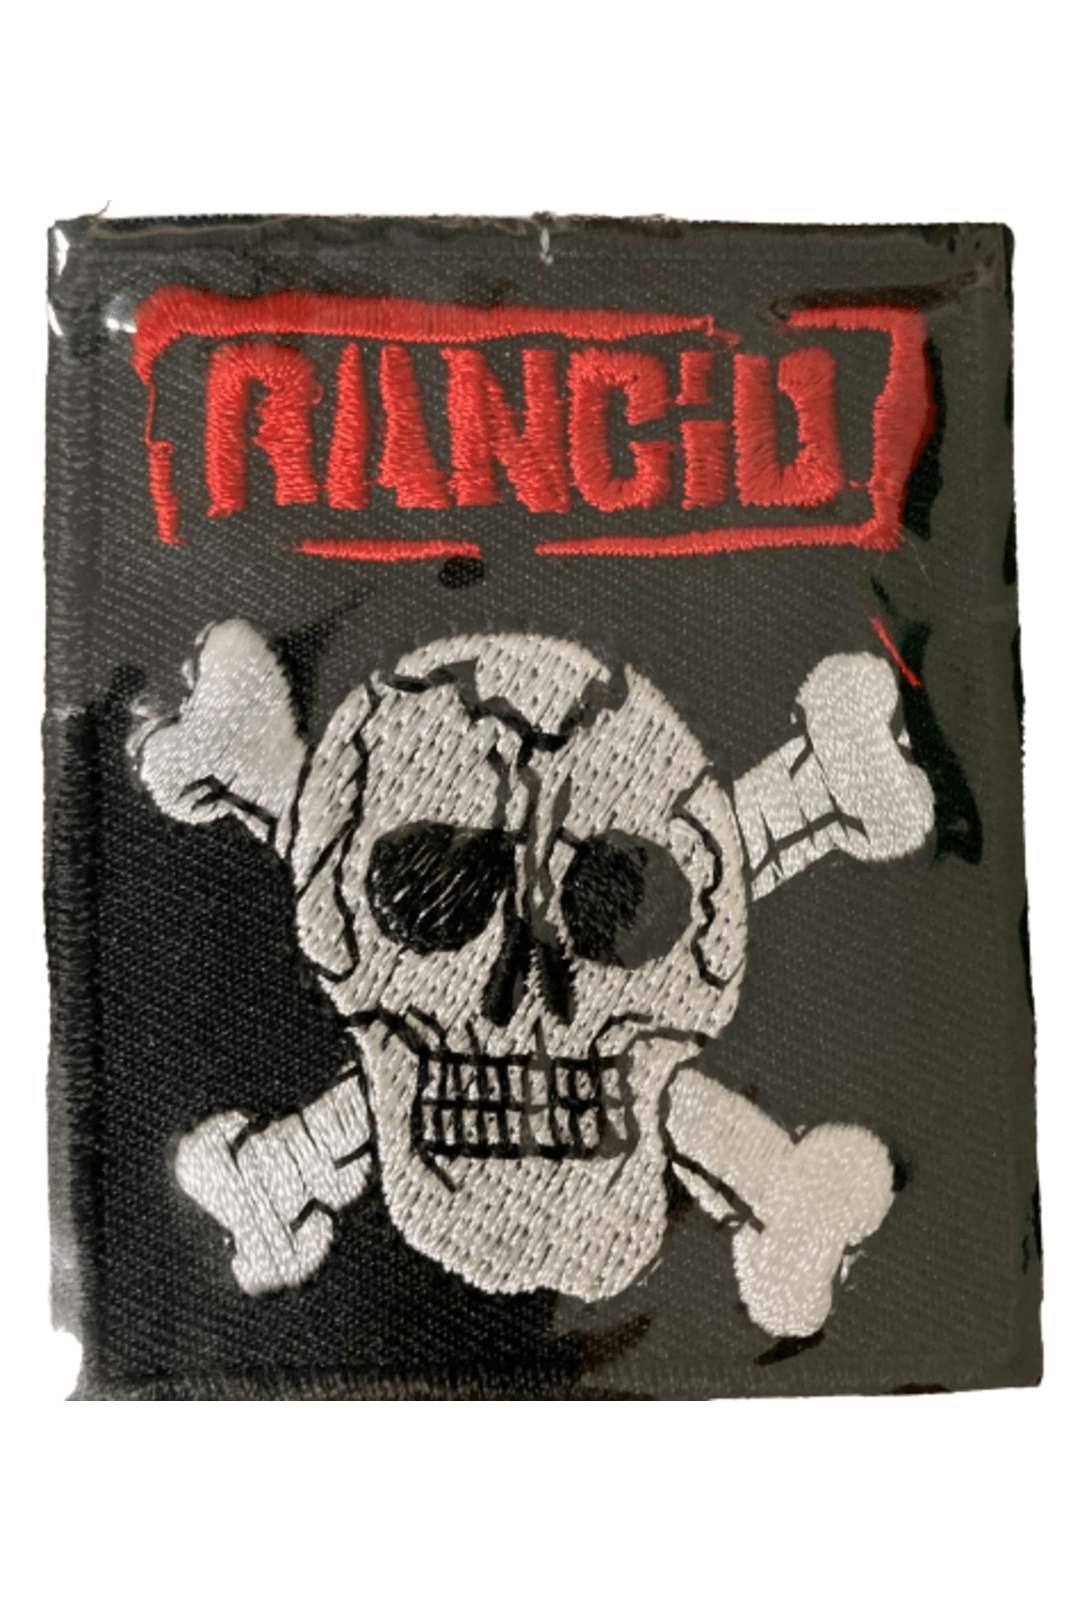 Rancid Skull and Crossbones Iron-on Patch